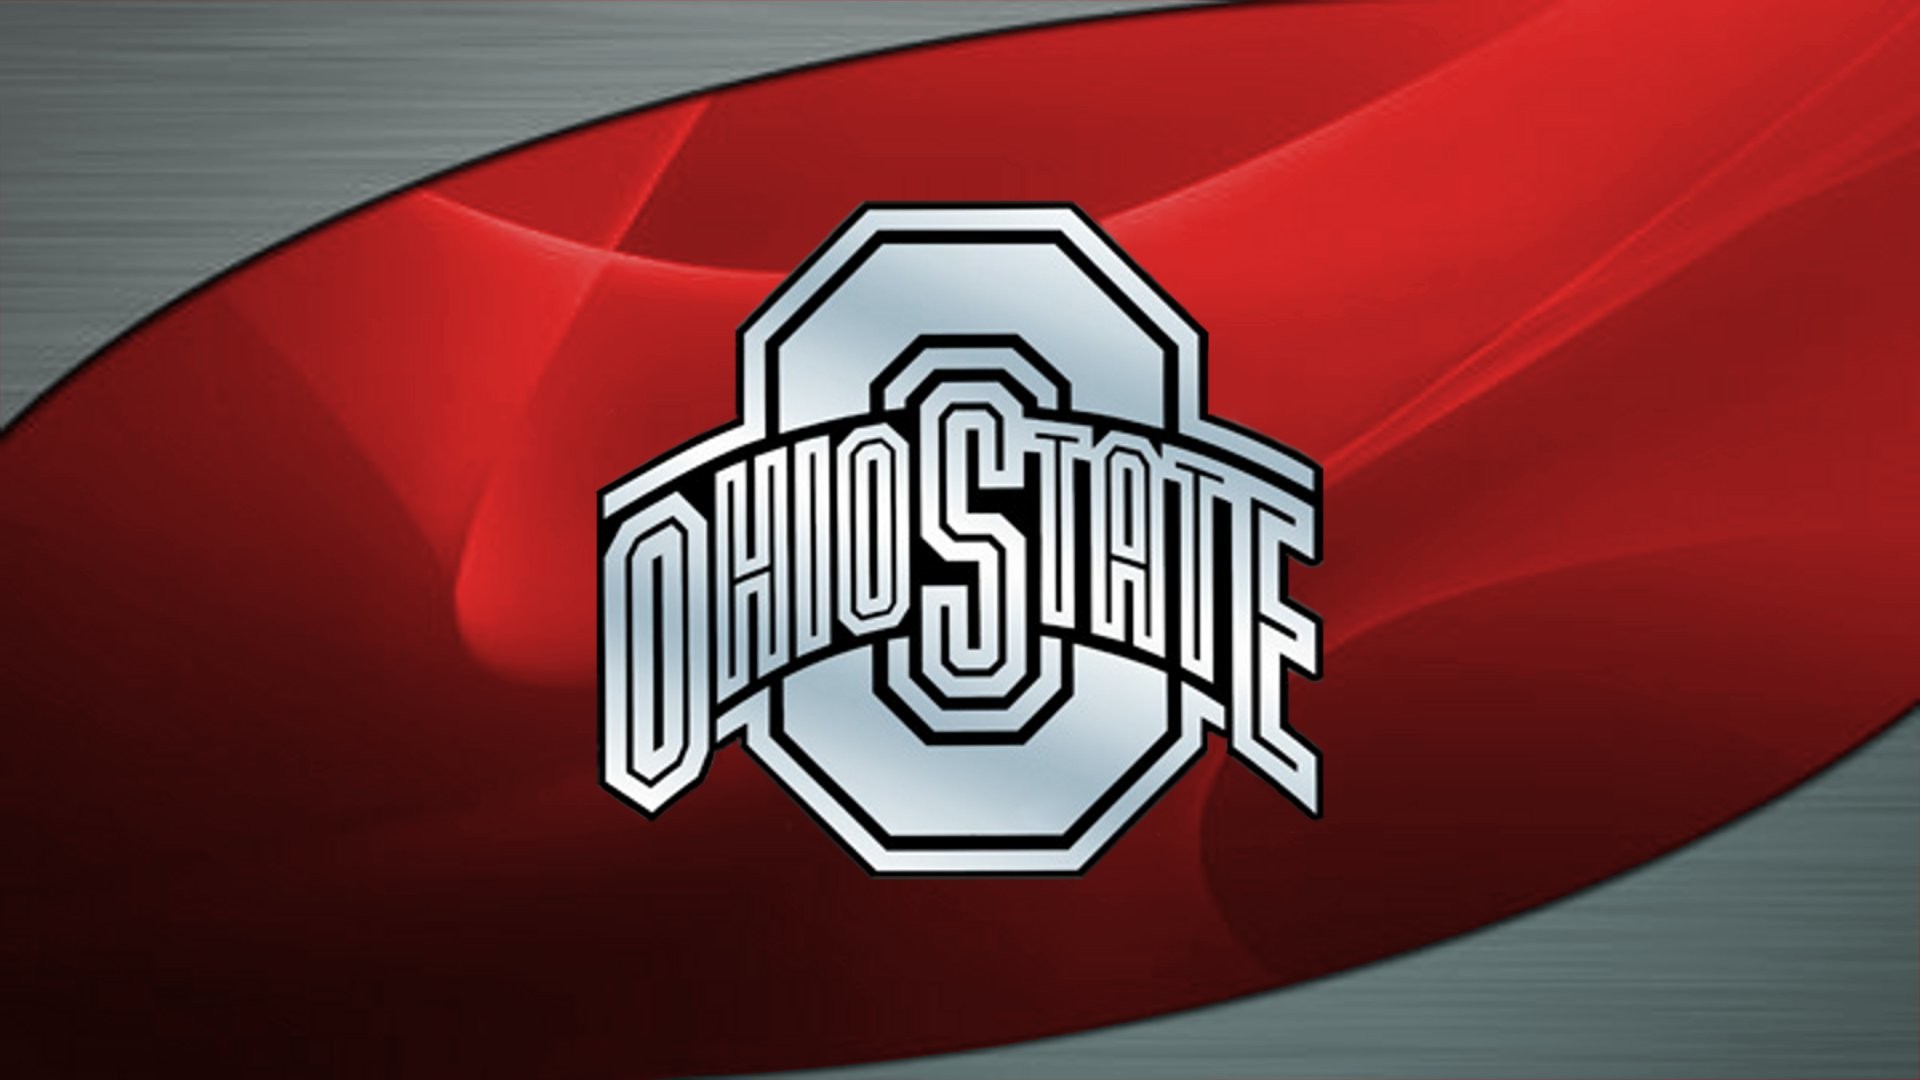 1920x1080 HD Wallpaper and background photos of OSU Desktop Wallpaper 129 for fans of  Ohio State Football images.